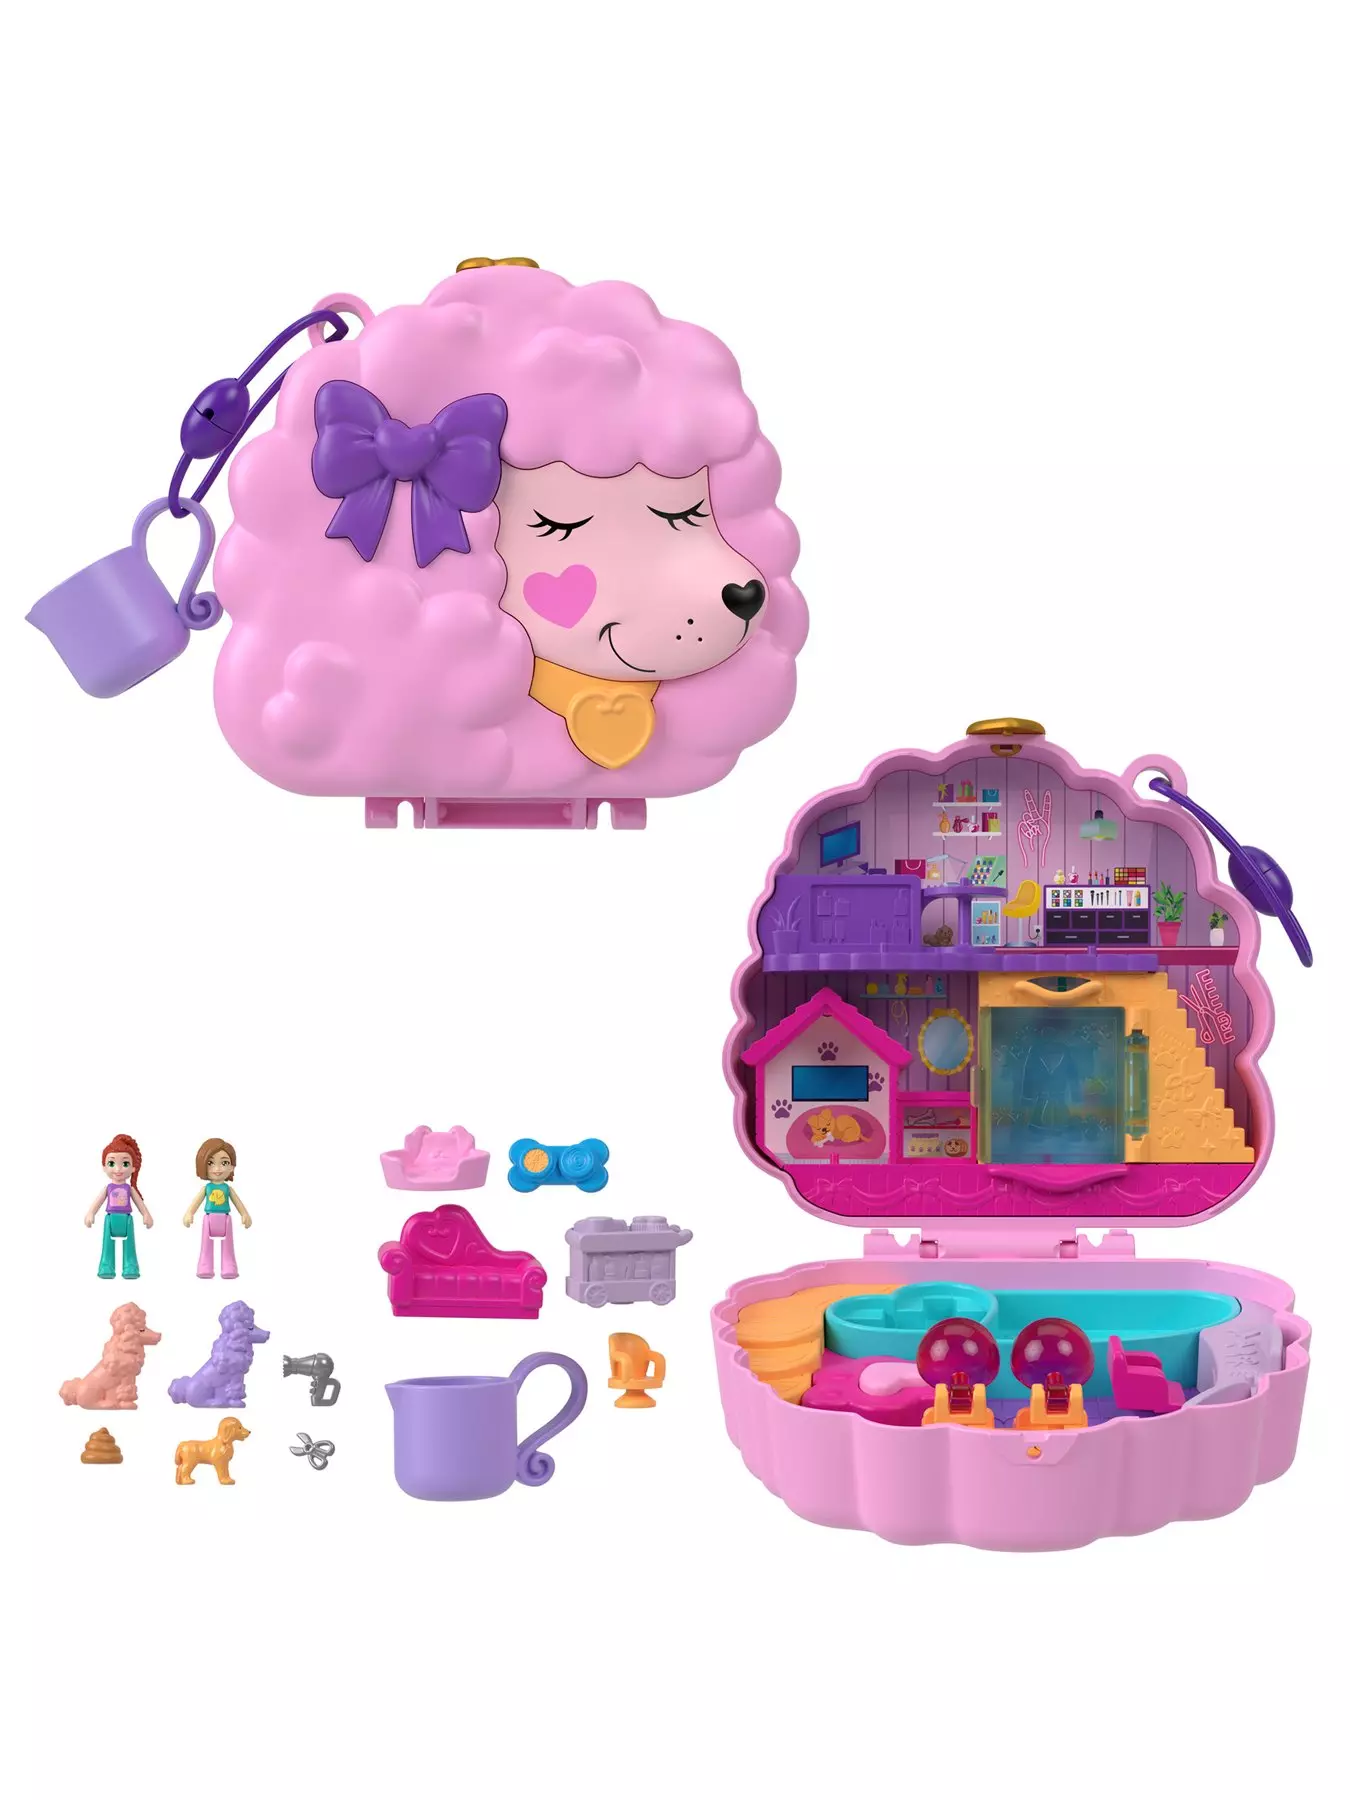 7 Polly Pocket Dolls with Rooted Hair - 6 girls 1 boy with Extra